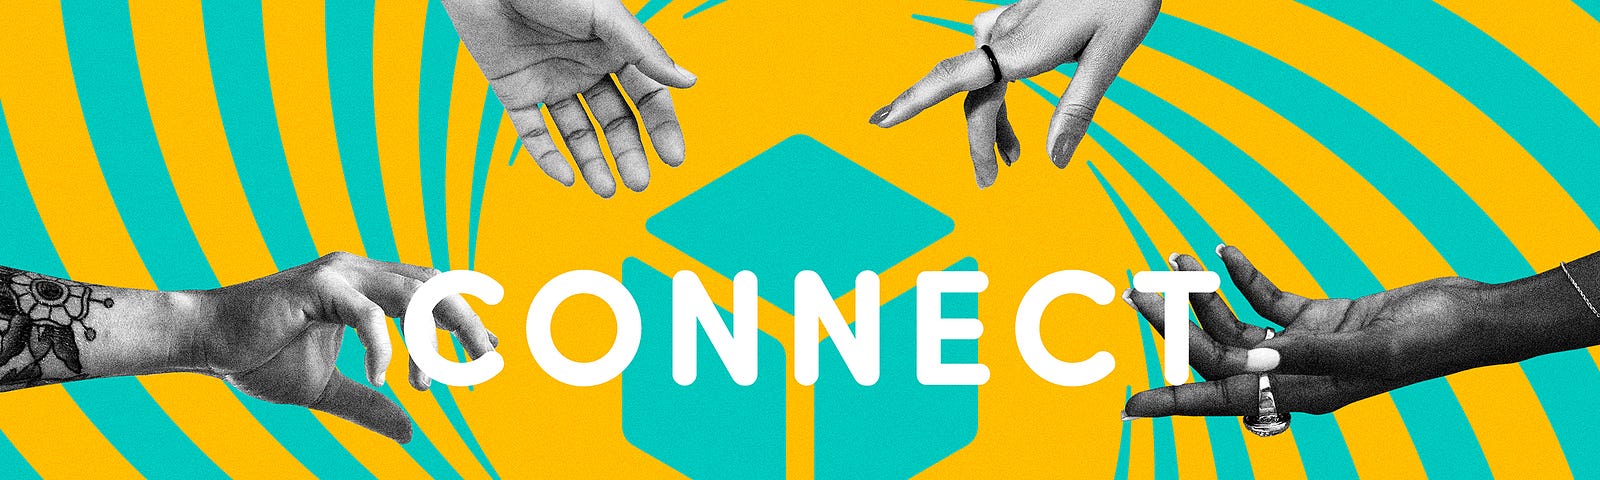 Illustration where 6 hands reach out to the center of the image that reads ‘Connect’. On the top left it states: Explore augmented audio reality together. On the bottom right is the logo of Cubemint.